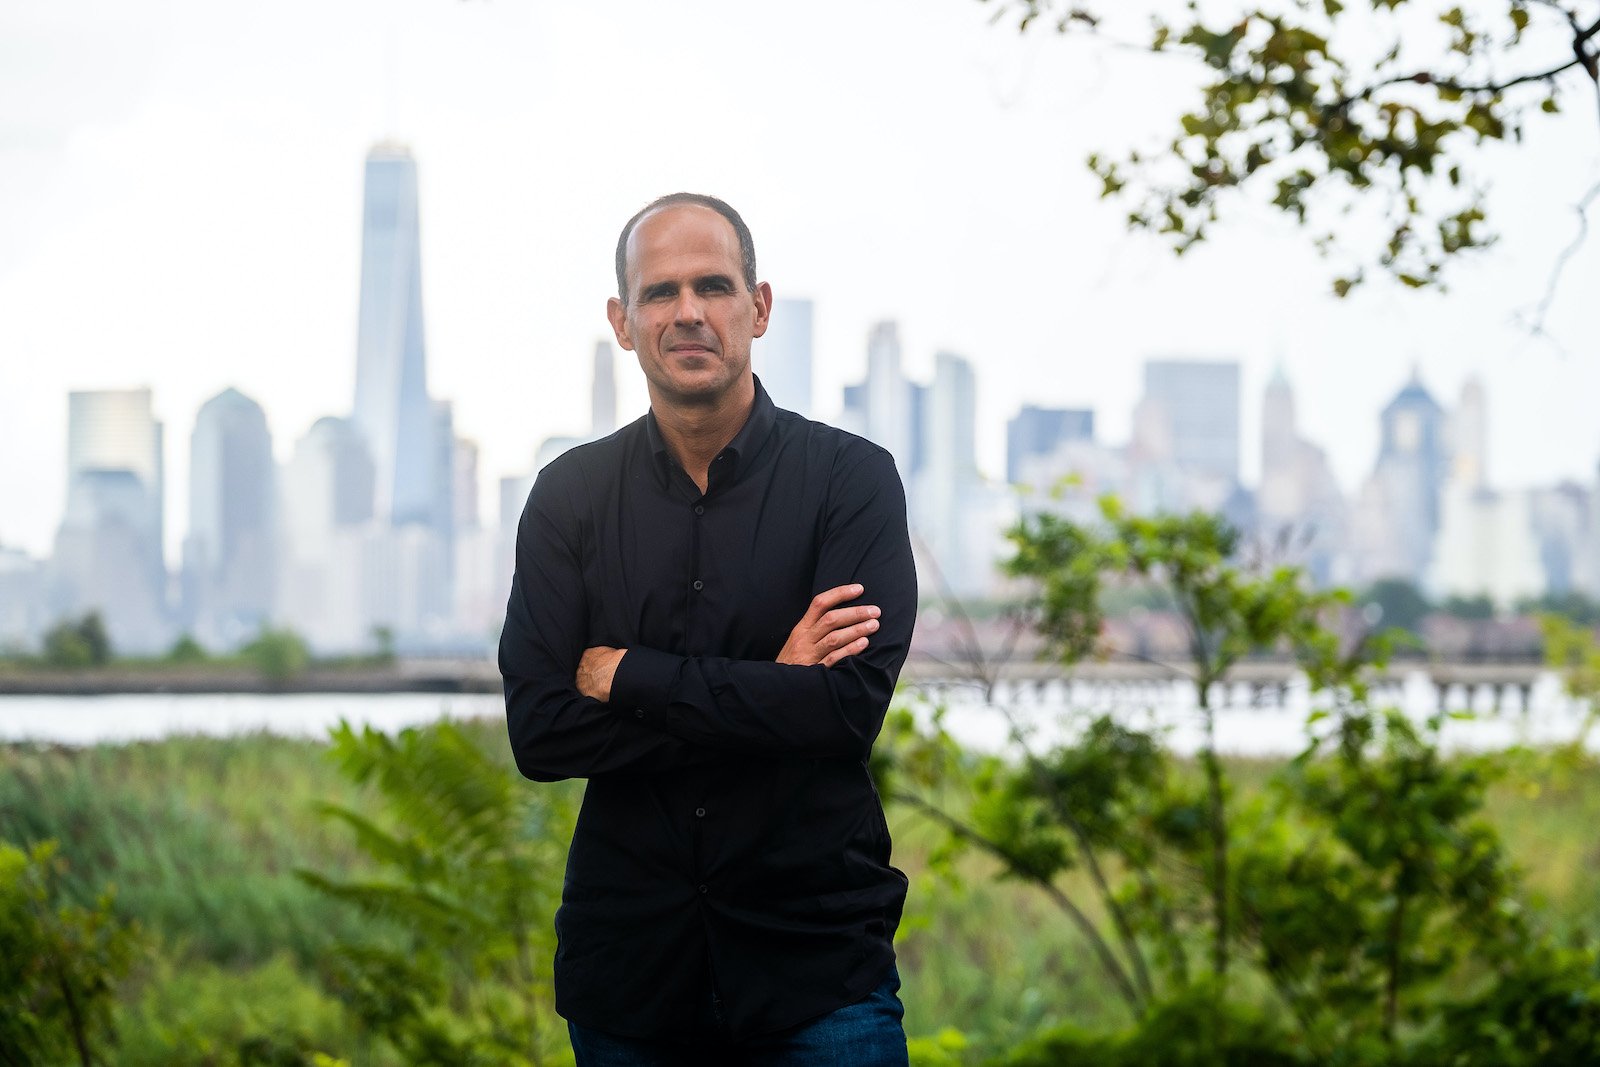 Marcus Lemonis from 'The Renovator' stands with his arms folded 